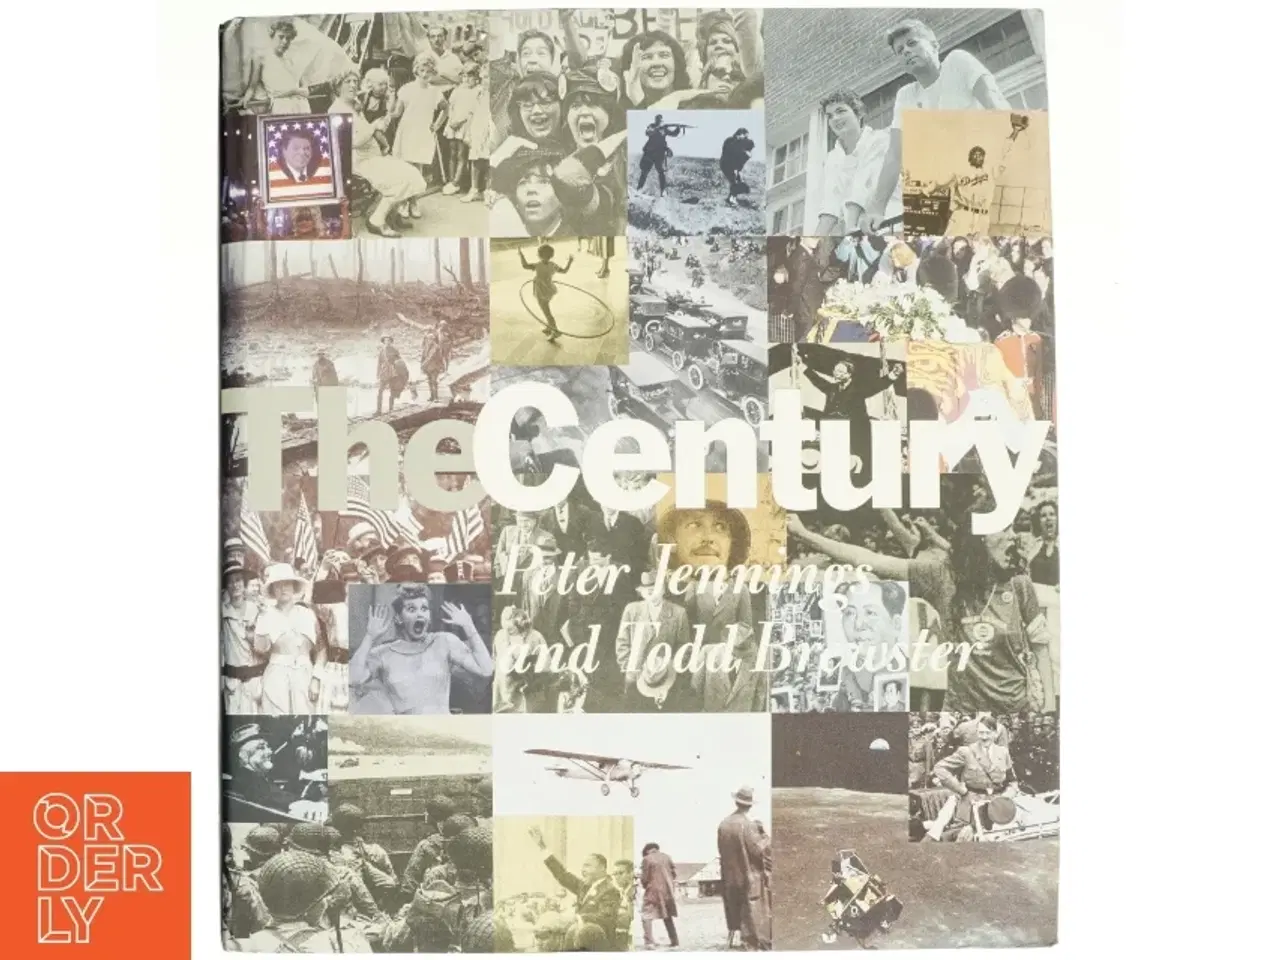 Billede 1 - The Century - The 20th Century in pictures and words af Peter Jennings and Todd Brewster (Bog)